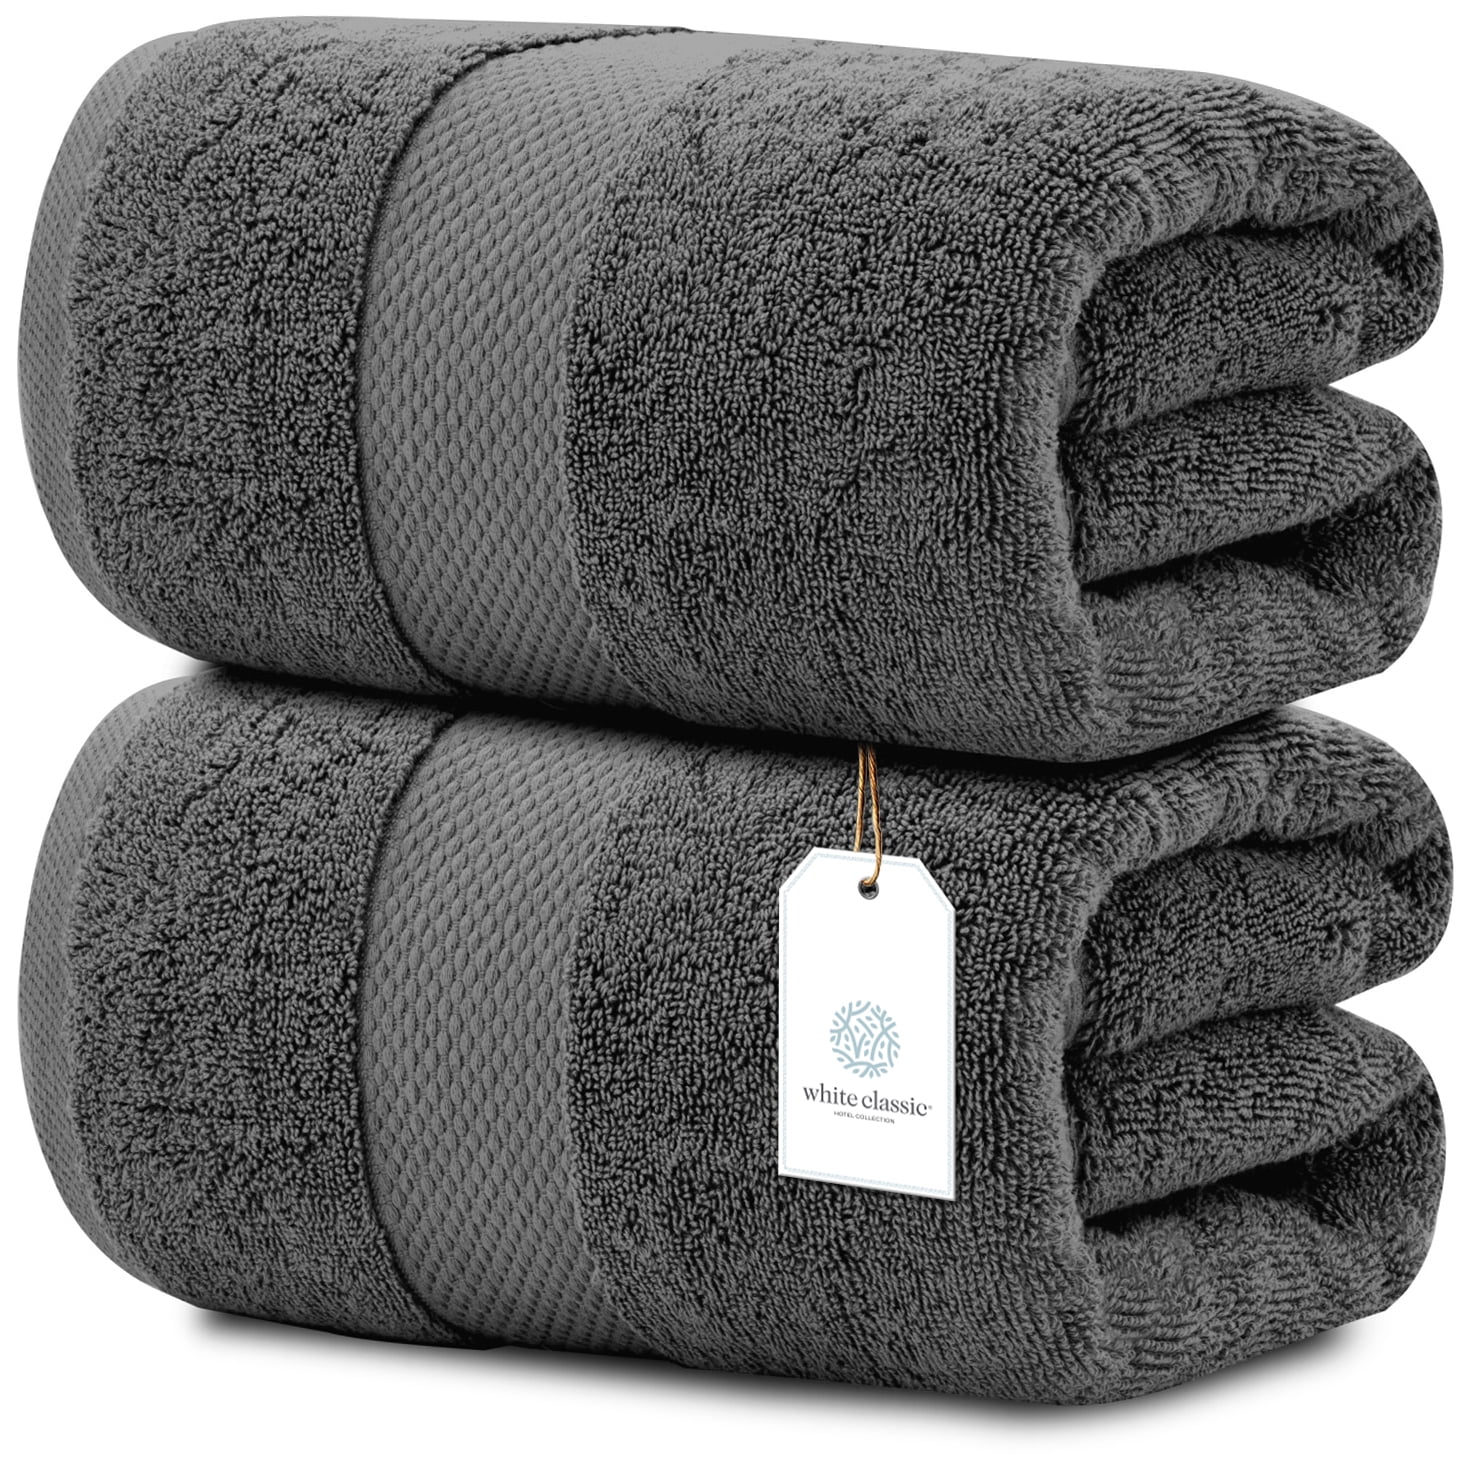 Towels set of 2 35x70 Luxury Hotel & Spa Towel Cotton Bamboo Bath Sheets 